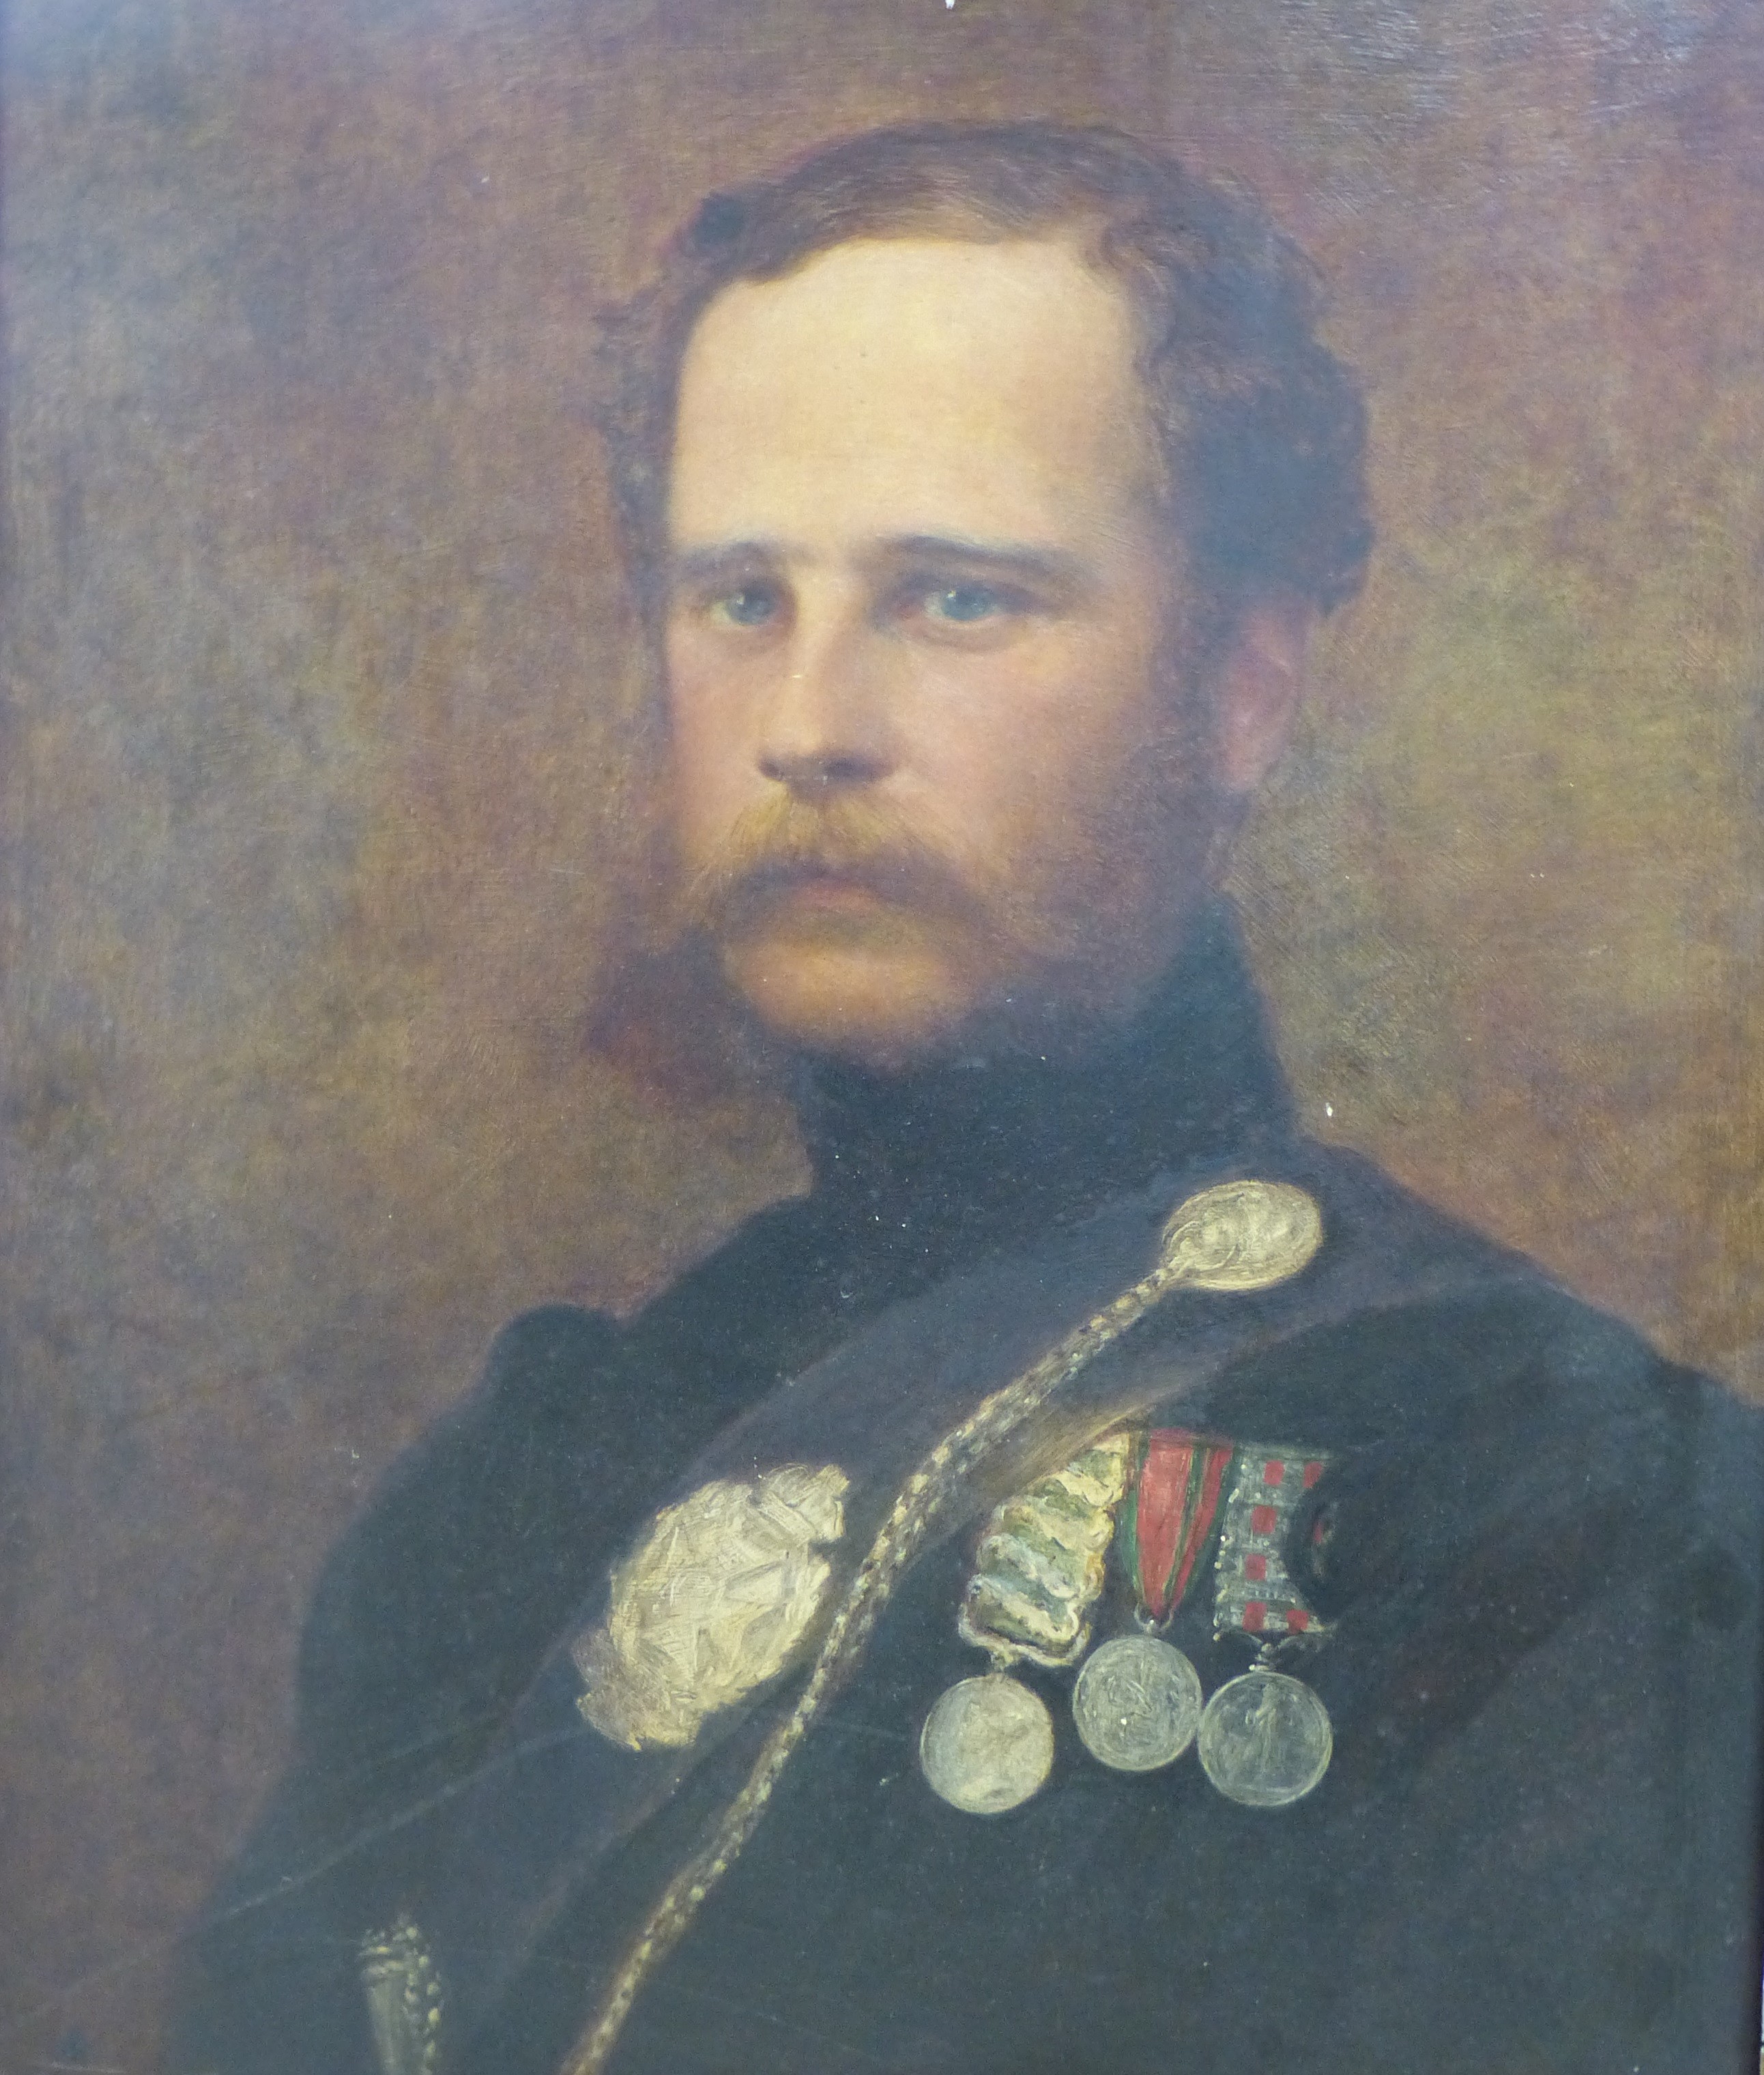 Attributed to George Frederick Watts, oil on panel, Portrait of a Richard Riversdale Glyn, 8th Hussars Crimean War, died at Aden 1859, 60 x 50cm                                                                            